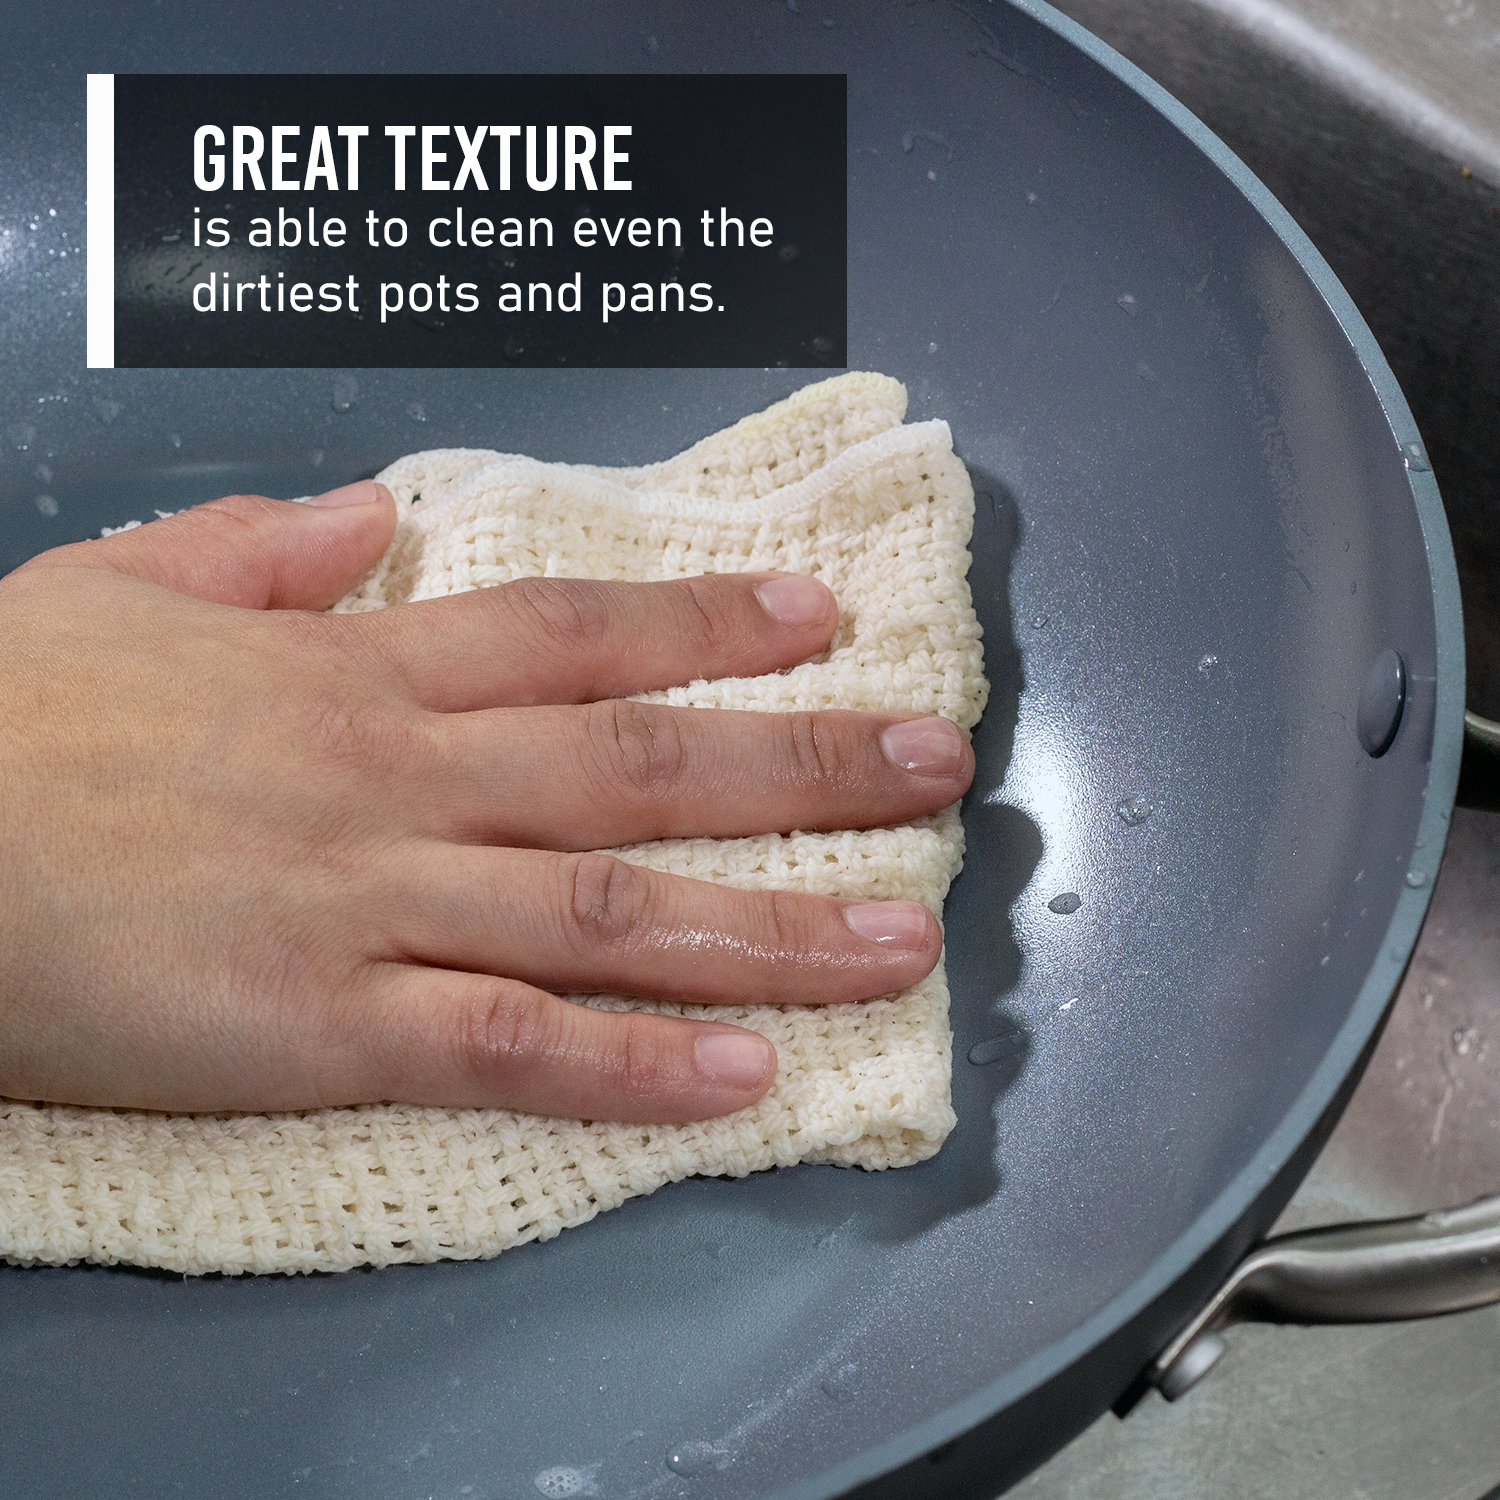 https://countrycottons.net/wp-content/uploads/04-Dishcloths_Natural_Great-Texture.jpg